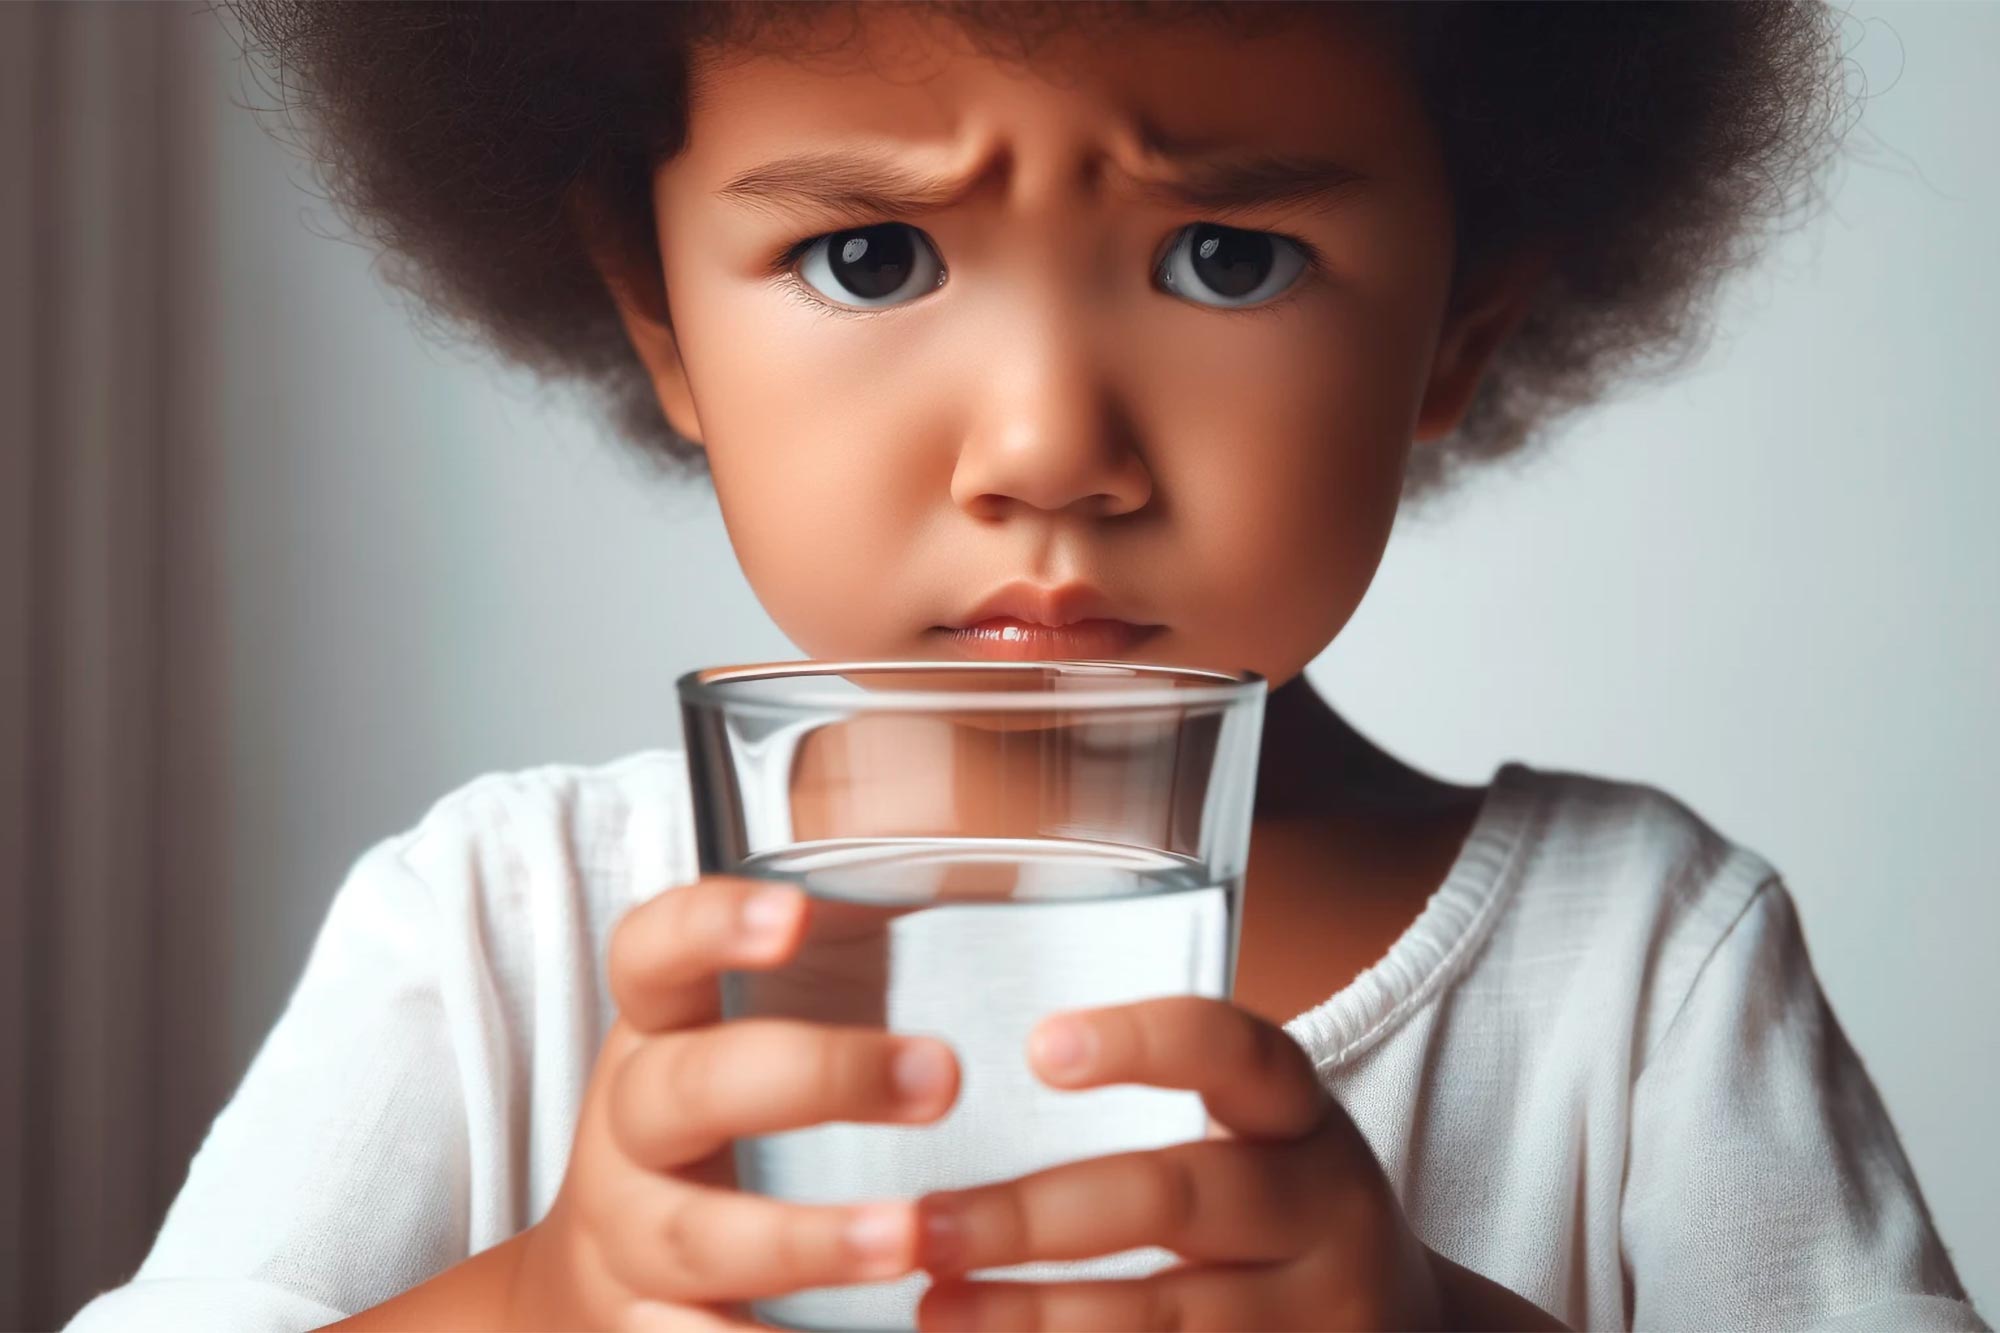 water-worries-excess-fluoride-linked-to-cognitive-impairment-in-children